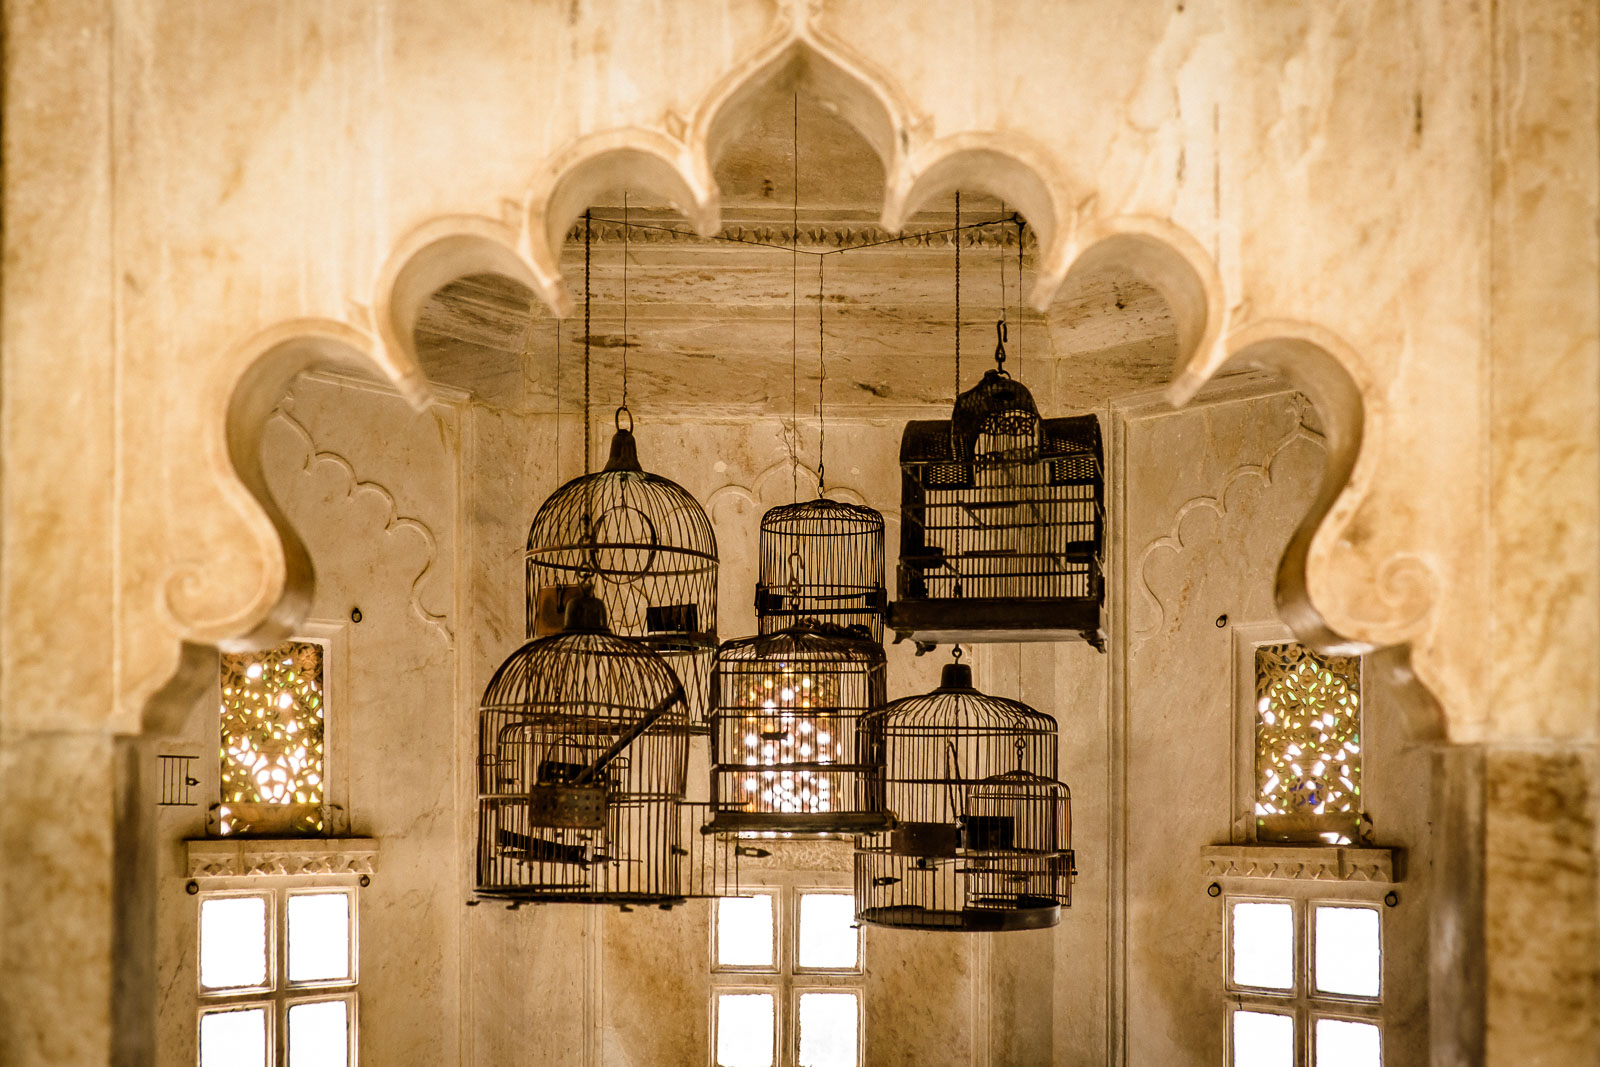 Bird Cages in City Palace of Udaipur